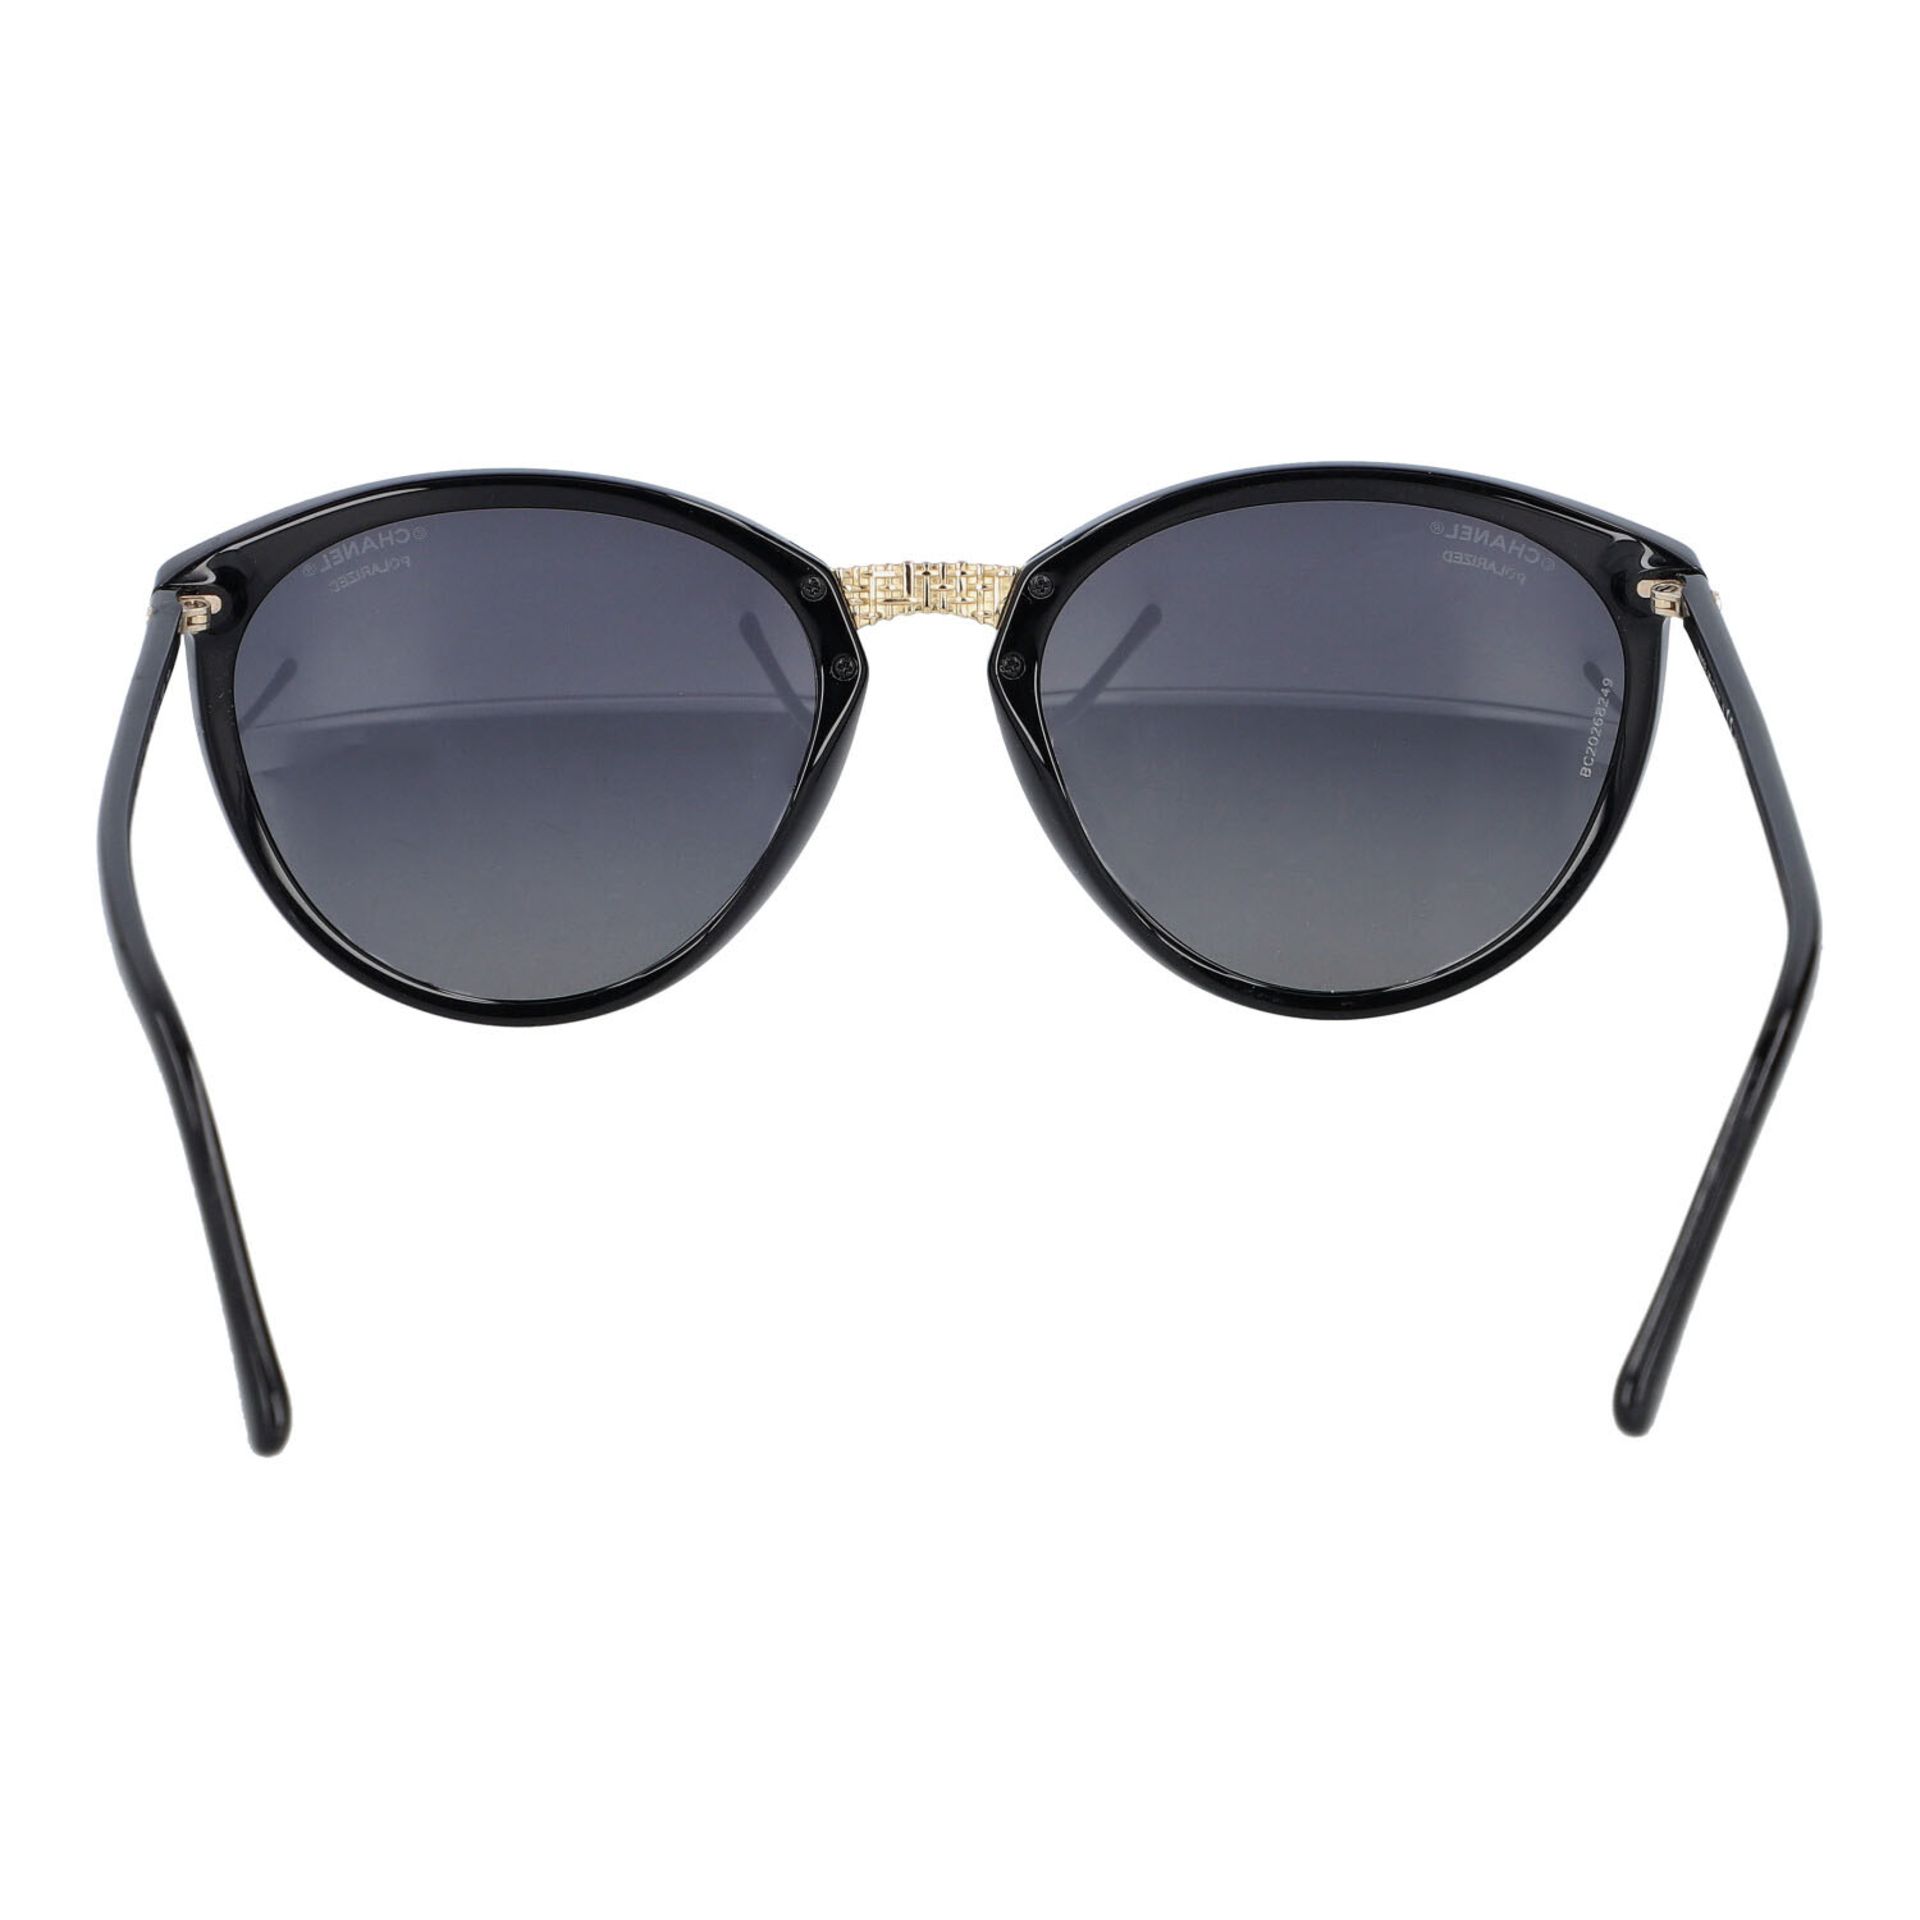 CHANEL Sonnenbrille "c.501/S8". - Image 4 of 5